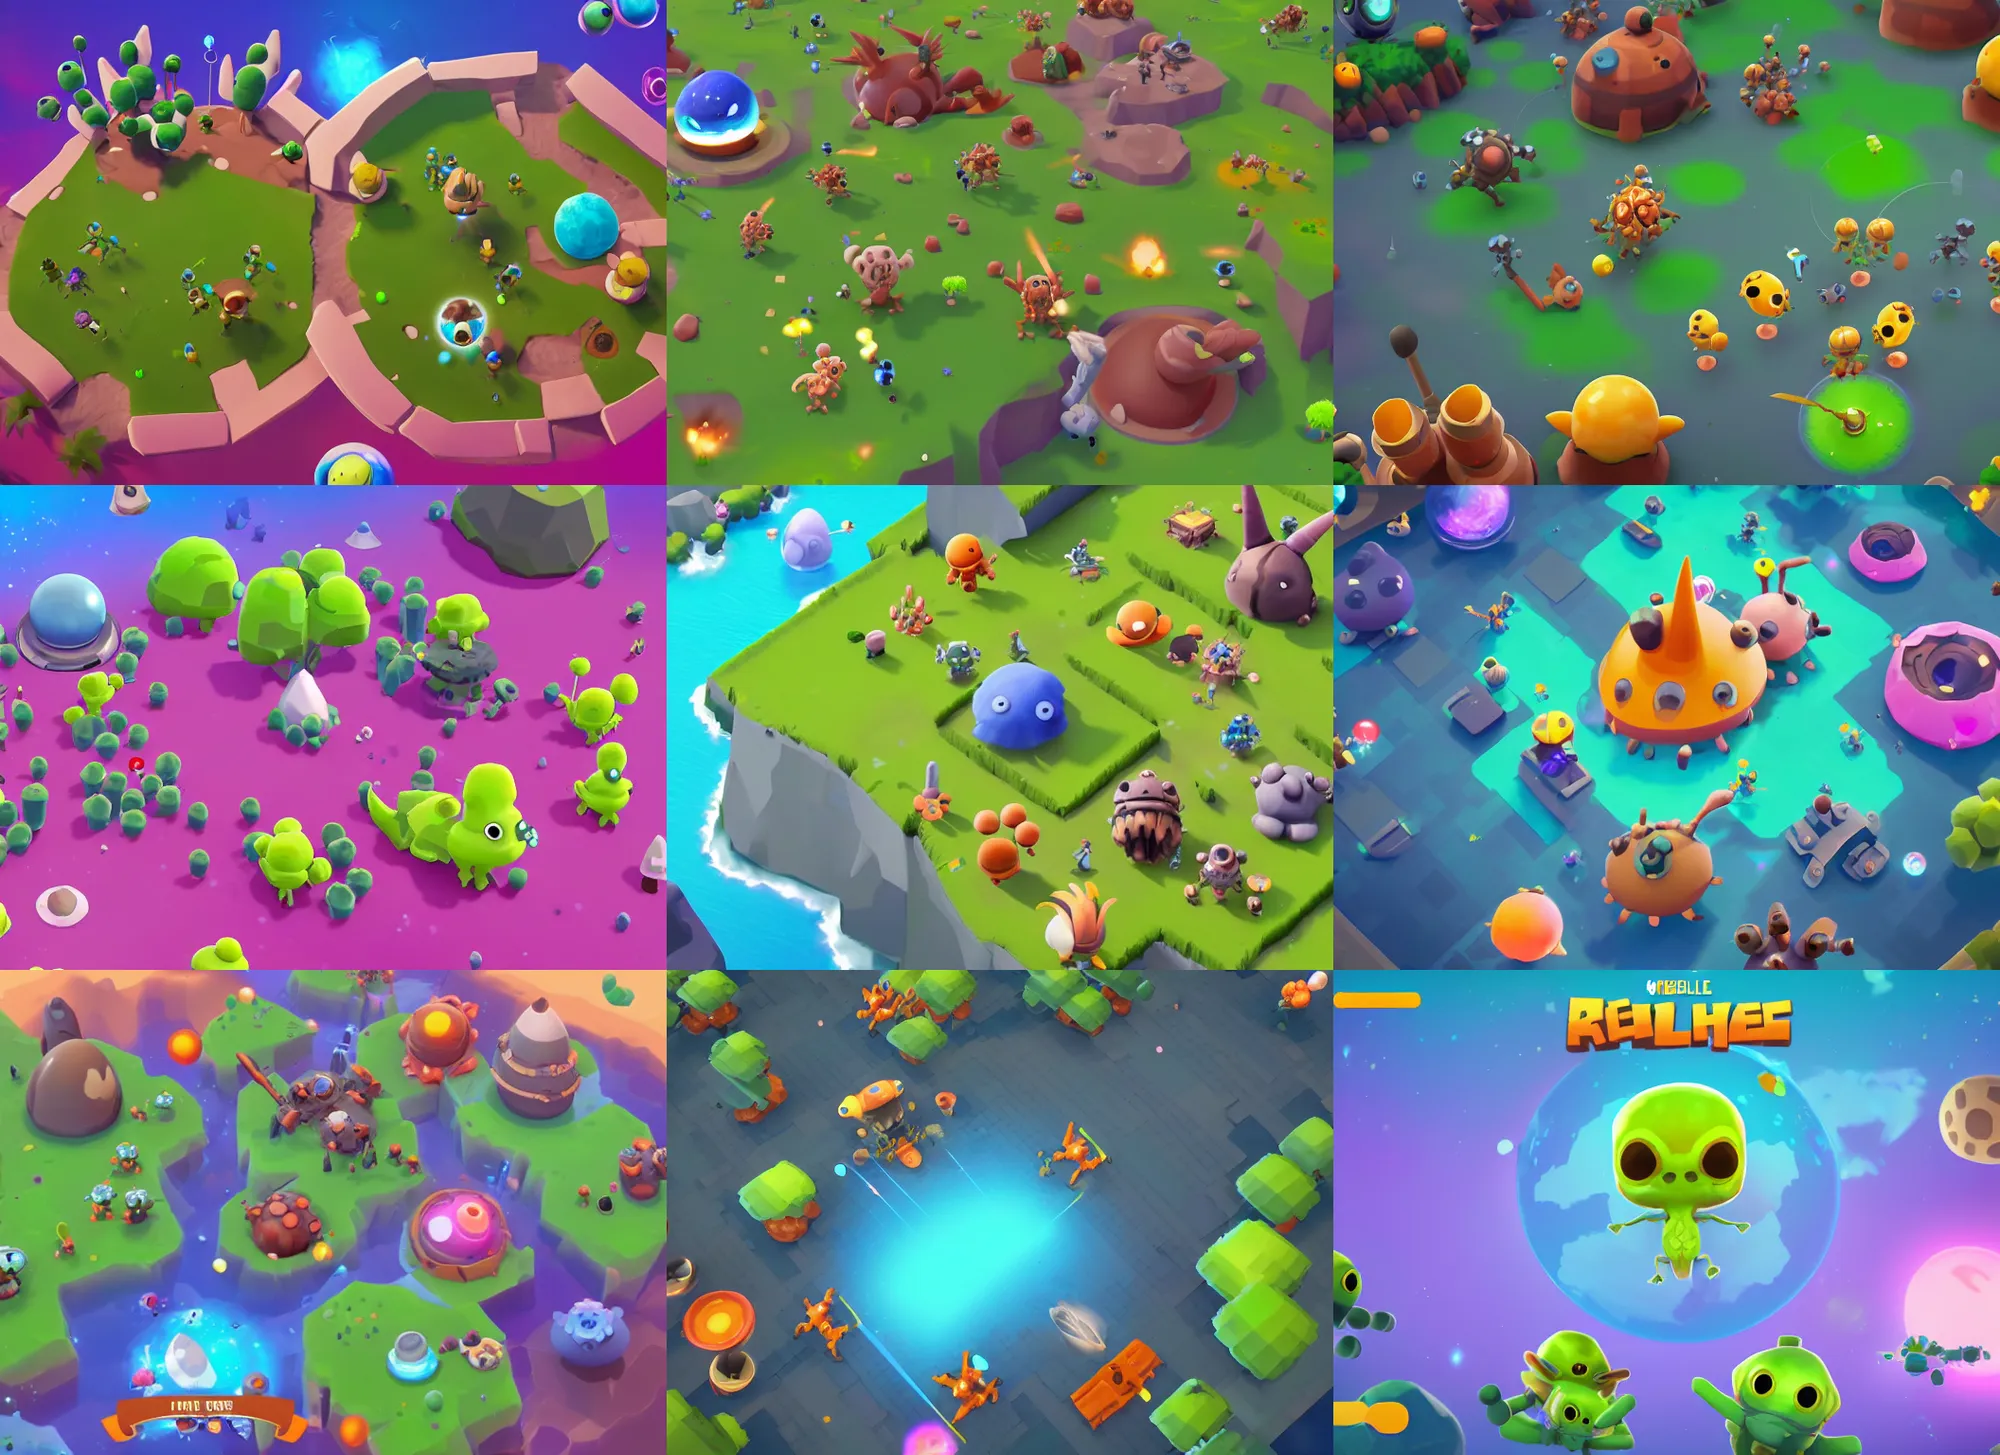 Prompt: mobile battle royale game about alien cute little animals that land on a planet with different biomes, craters, alien capsules, bushes in the visual style of Spore and Brawl Stars, view from above and slightly behind, planet curvature, with ui ux